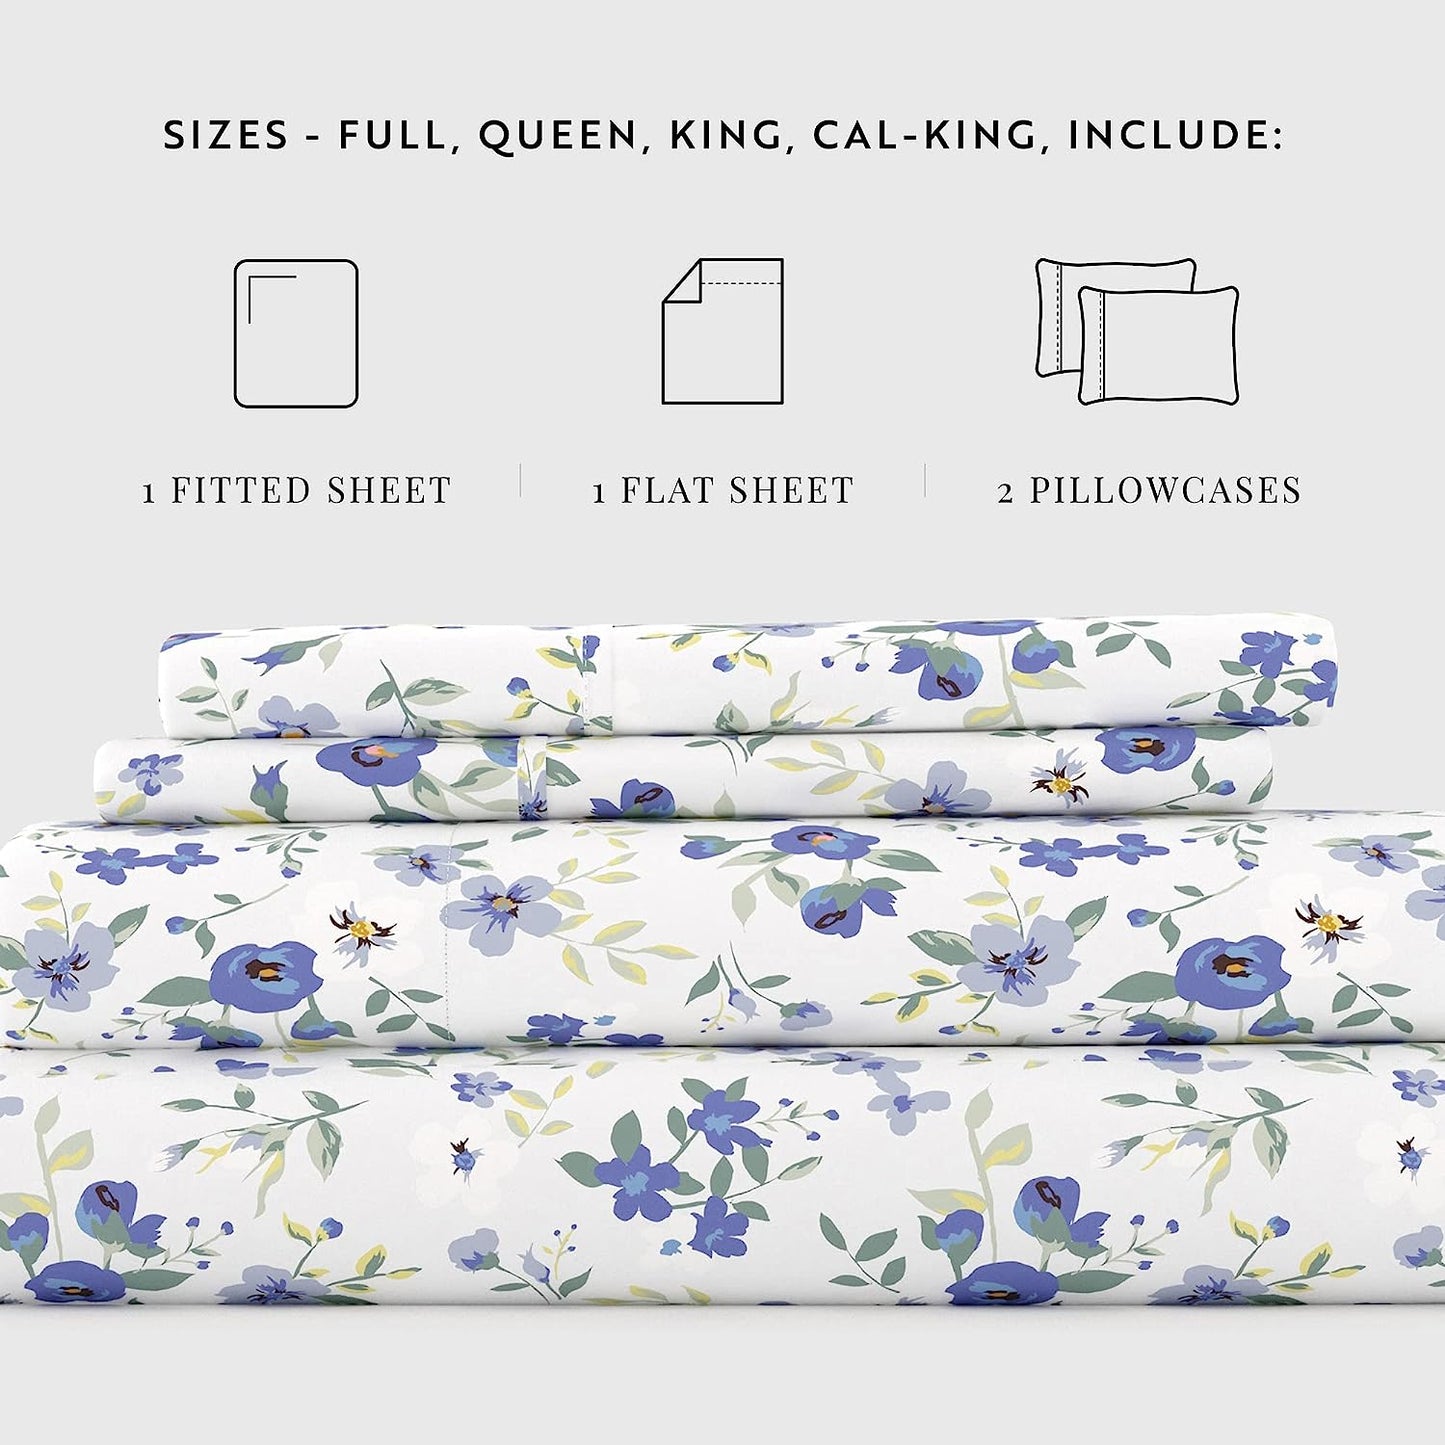 Linen Market 4 Piece Cal King Bedding Sheet Set (Light Blue Floral) - Sleep Better Than Ever with These Ultra-Soft & Cooling Bed Sheets for Your Cal King Size Bed - Deep Pocket Fits 16" Mattress